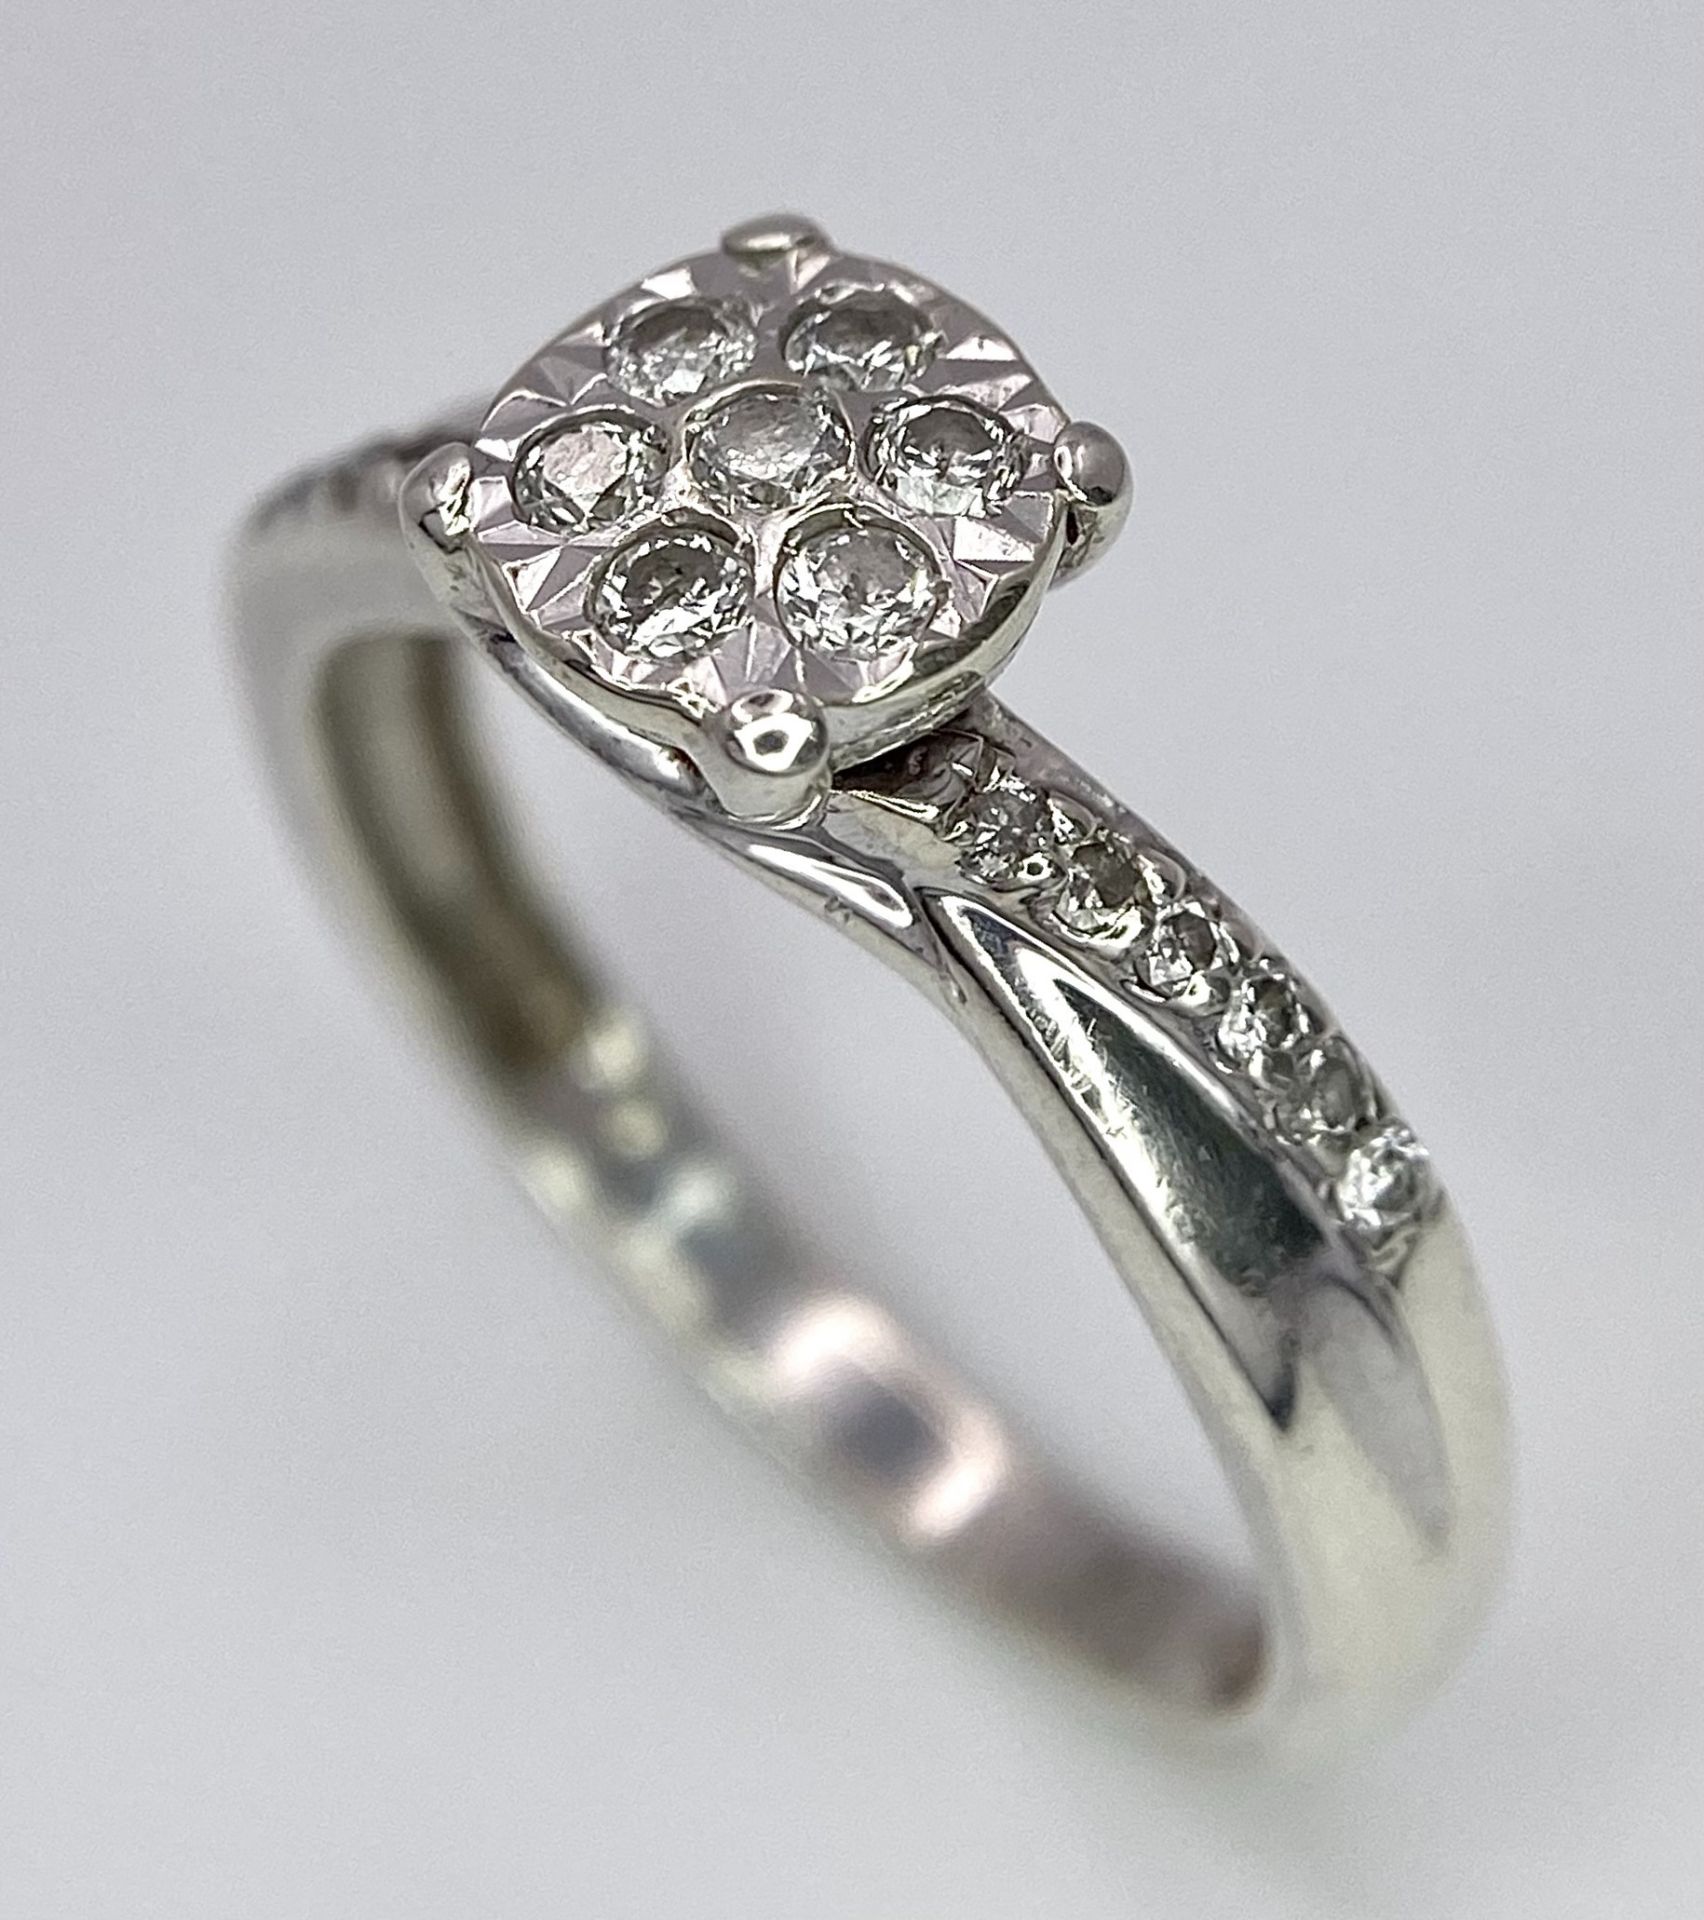 A 9K White Gold Diamond Cluster Ring. Seven small diamonds on a circular base with diamonds on - Image 2 of 6